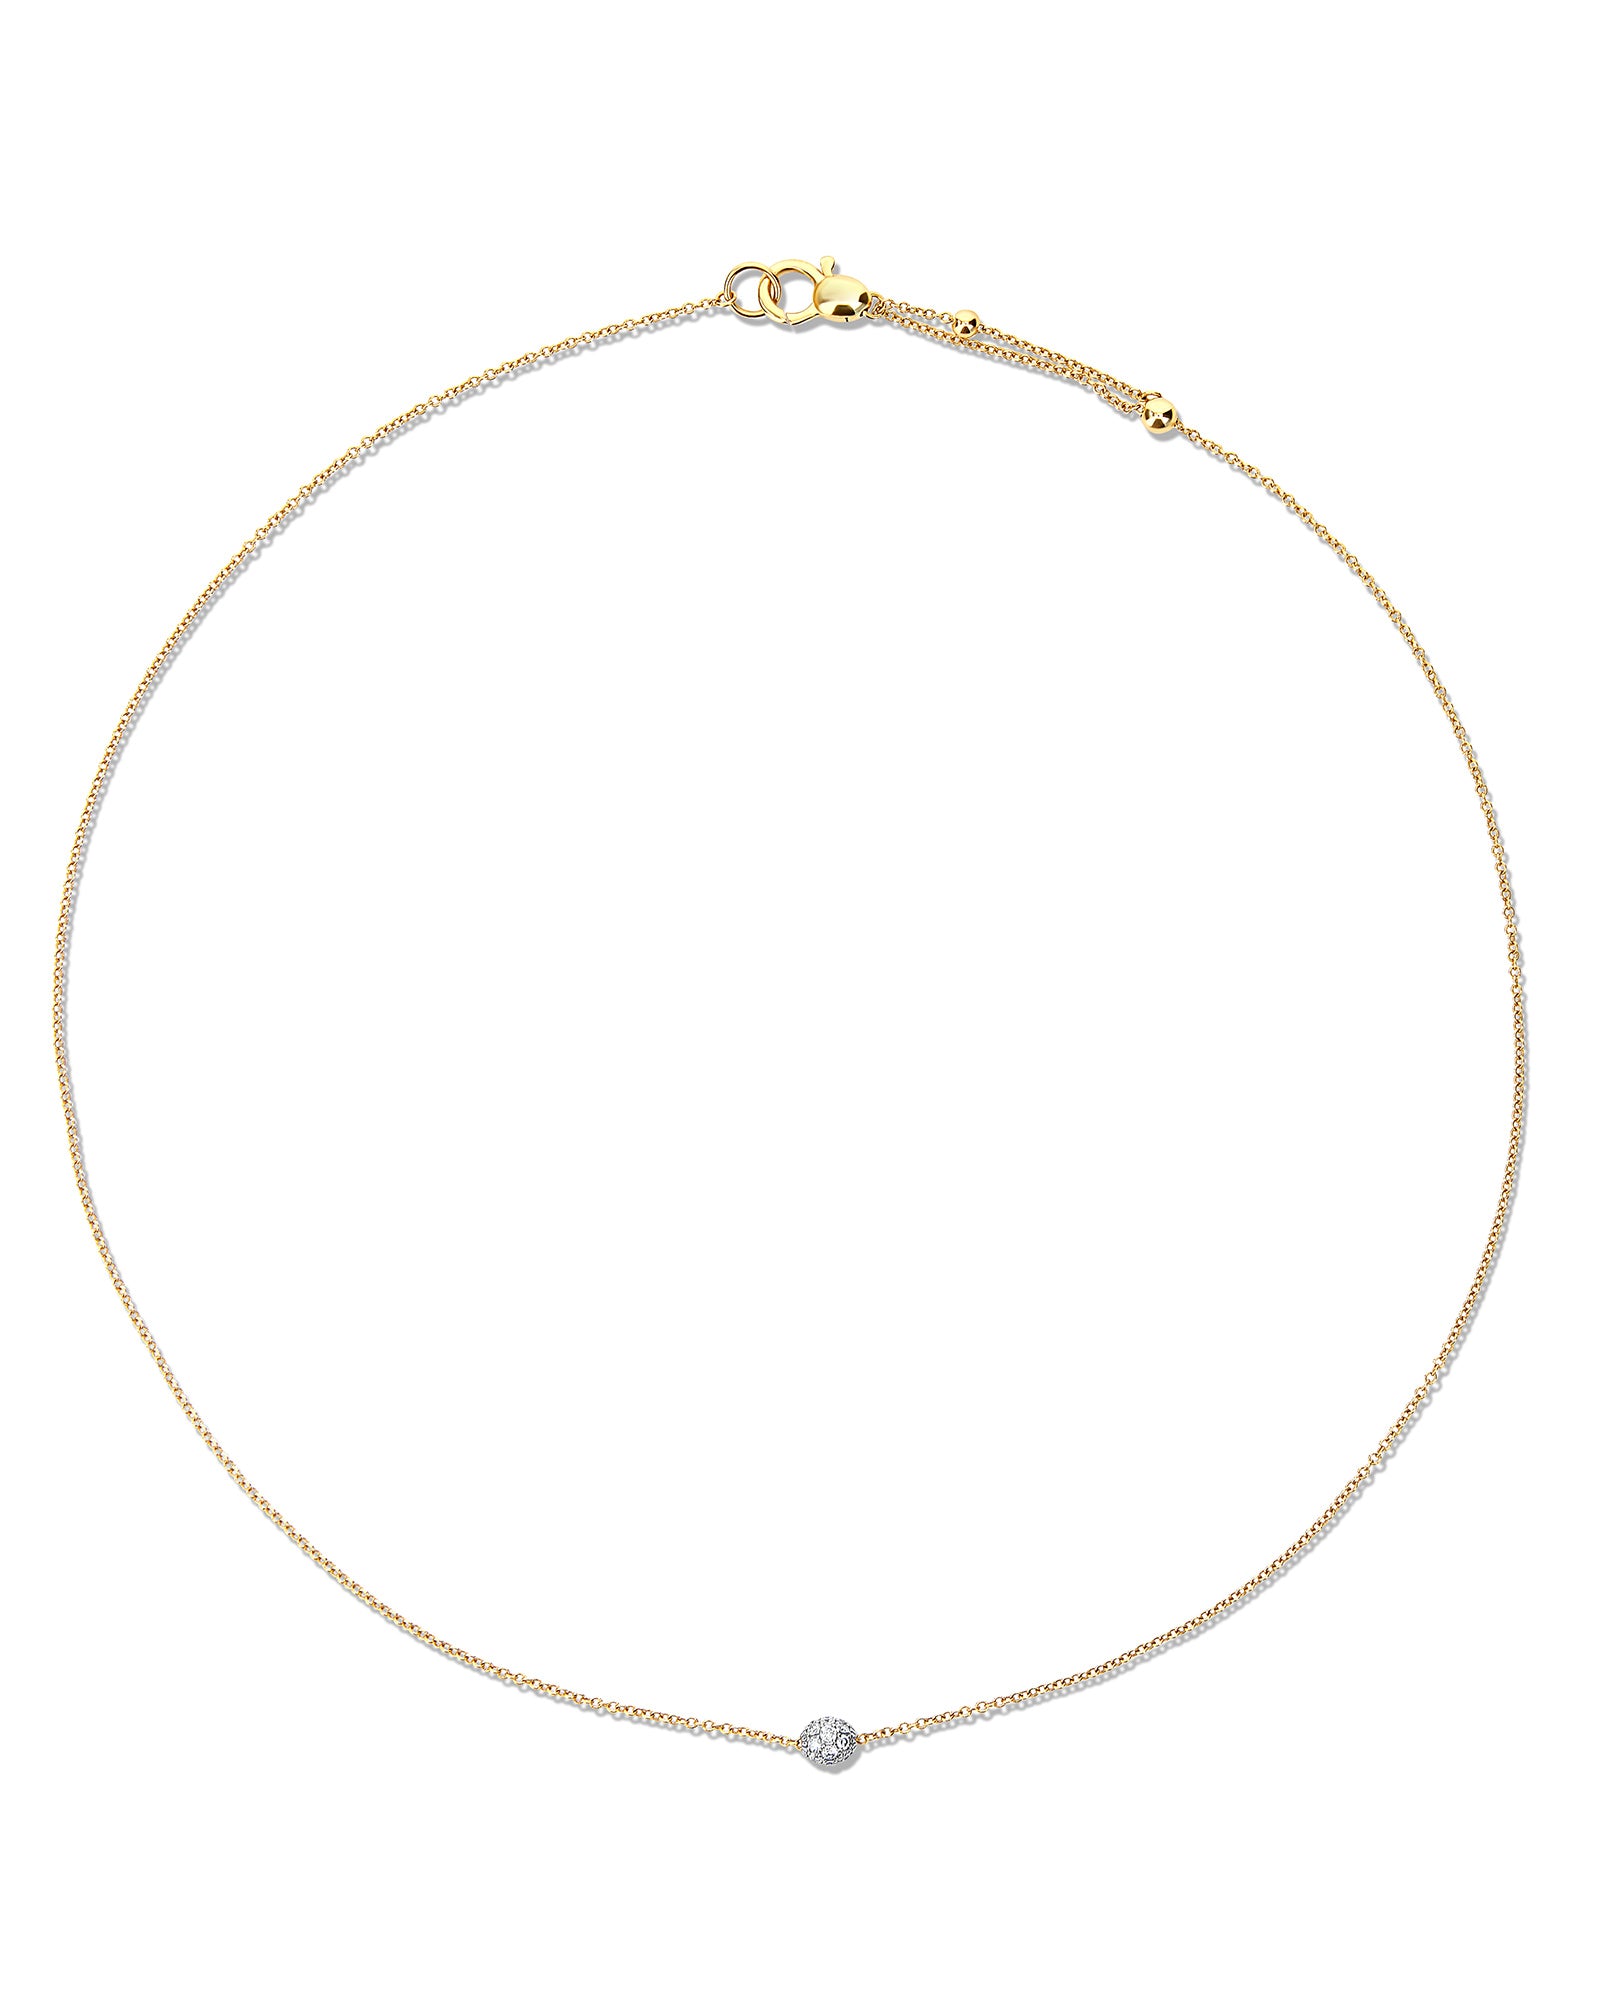 "Elite" Gold and Diamonds Light Point Necklace